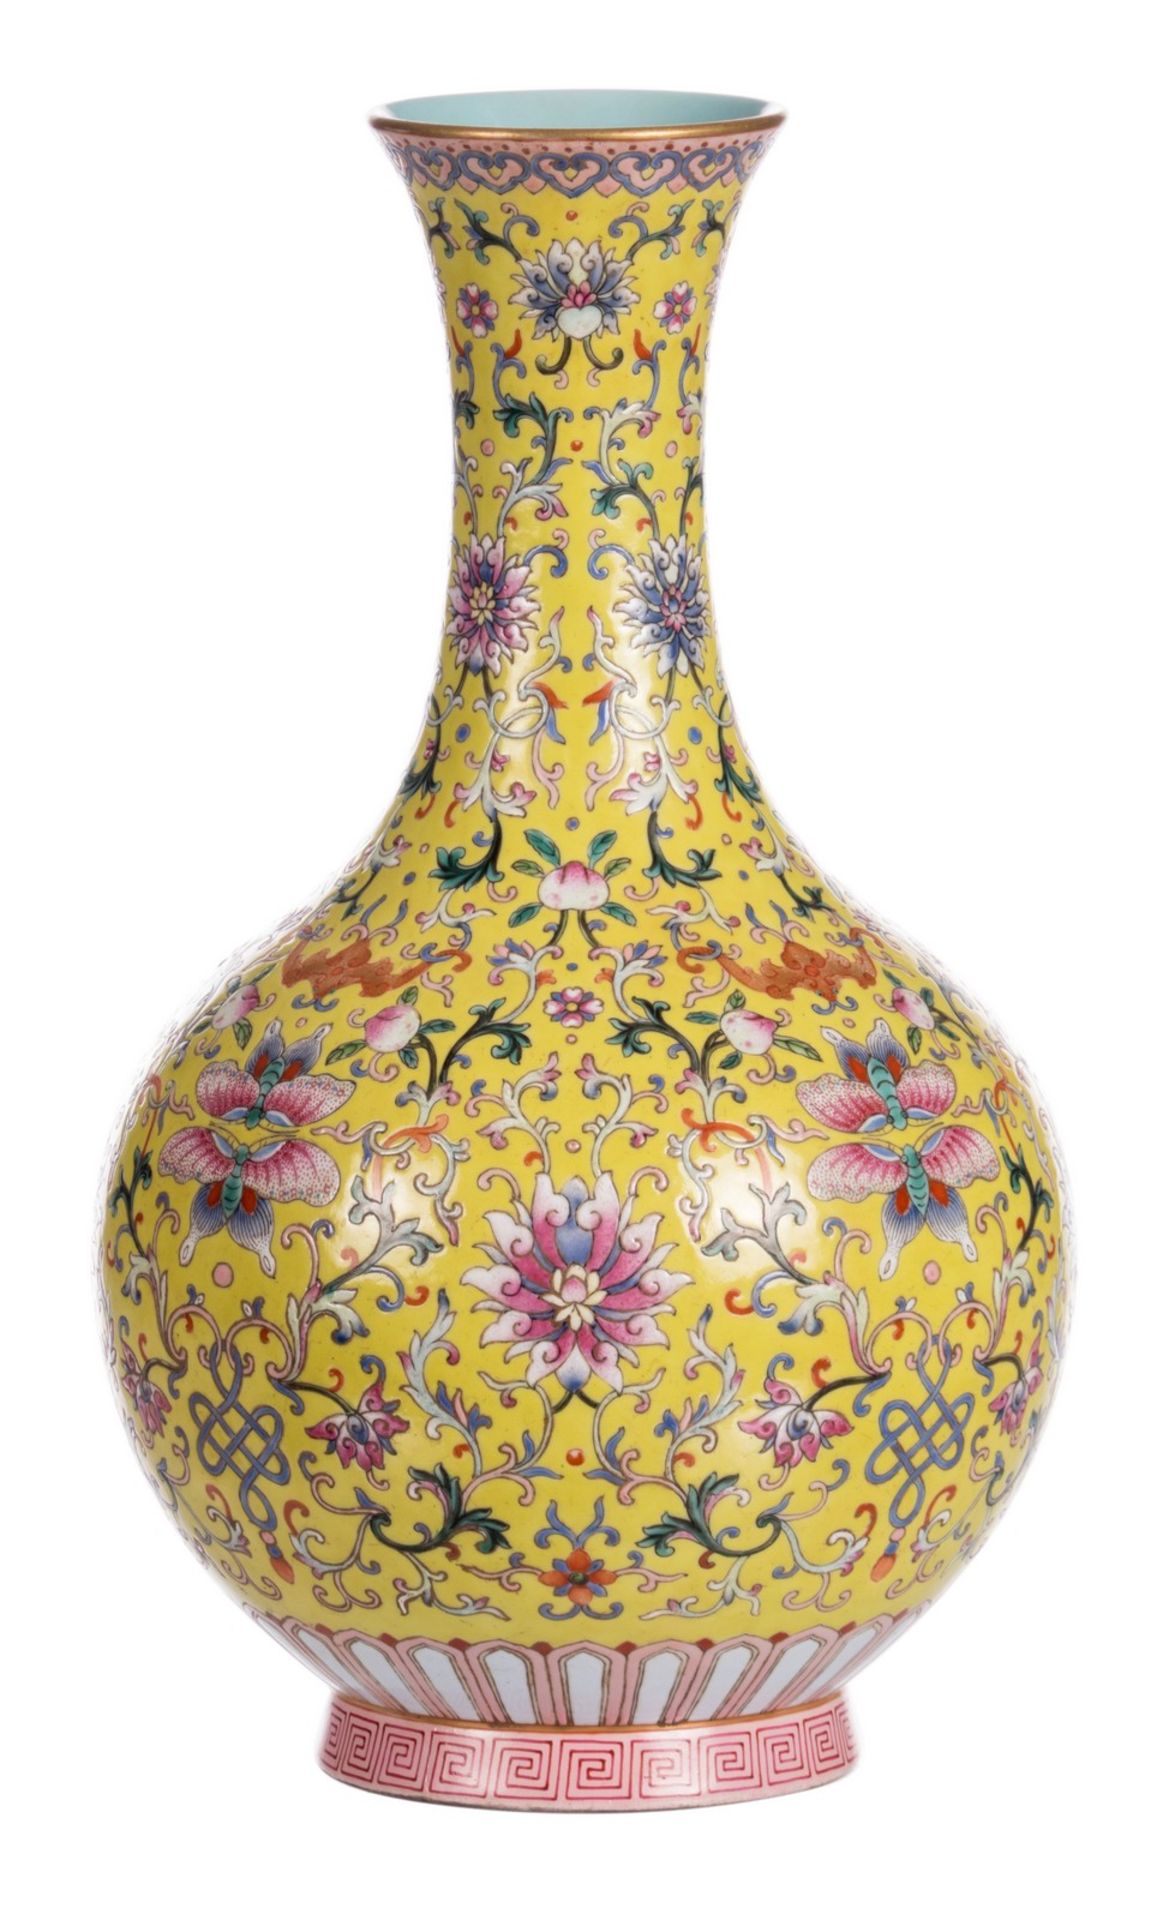 A Chinese yellow ground famille rose bottle vase, floral decorated with butterflies and bats, marked